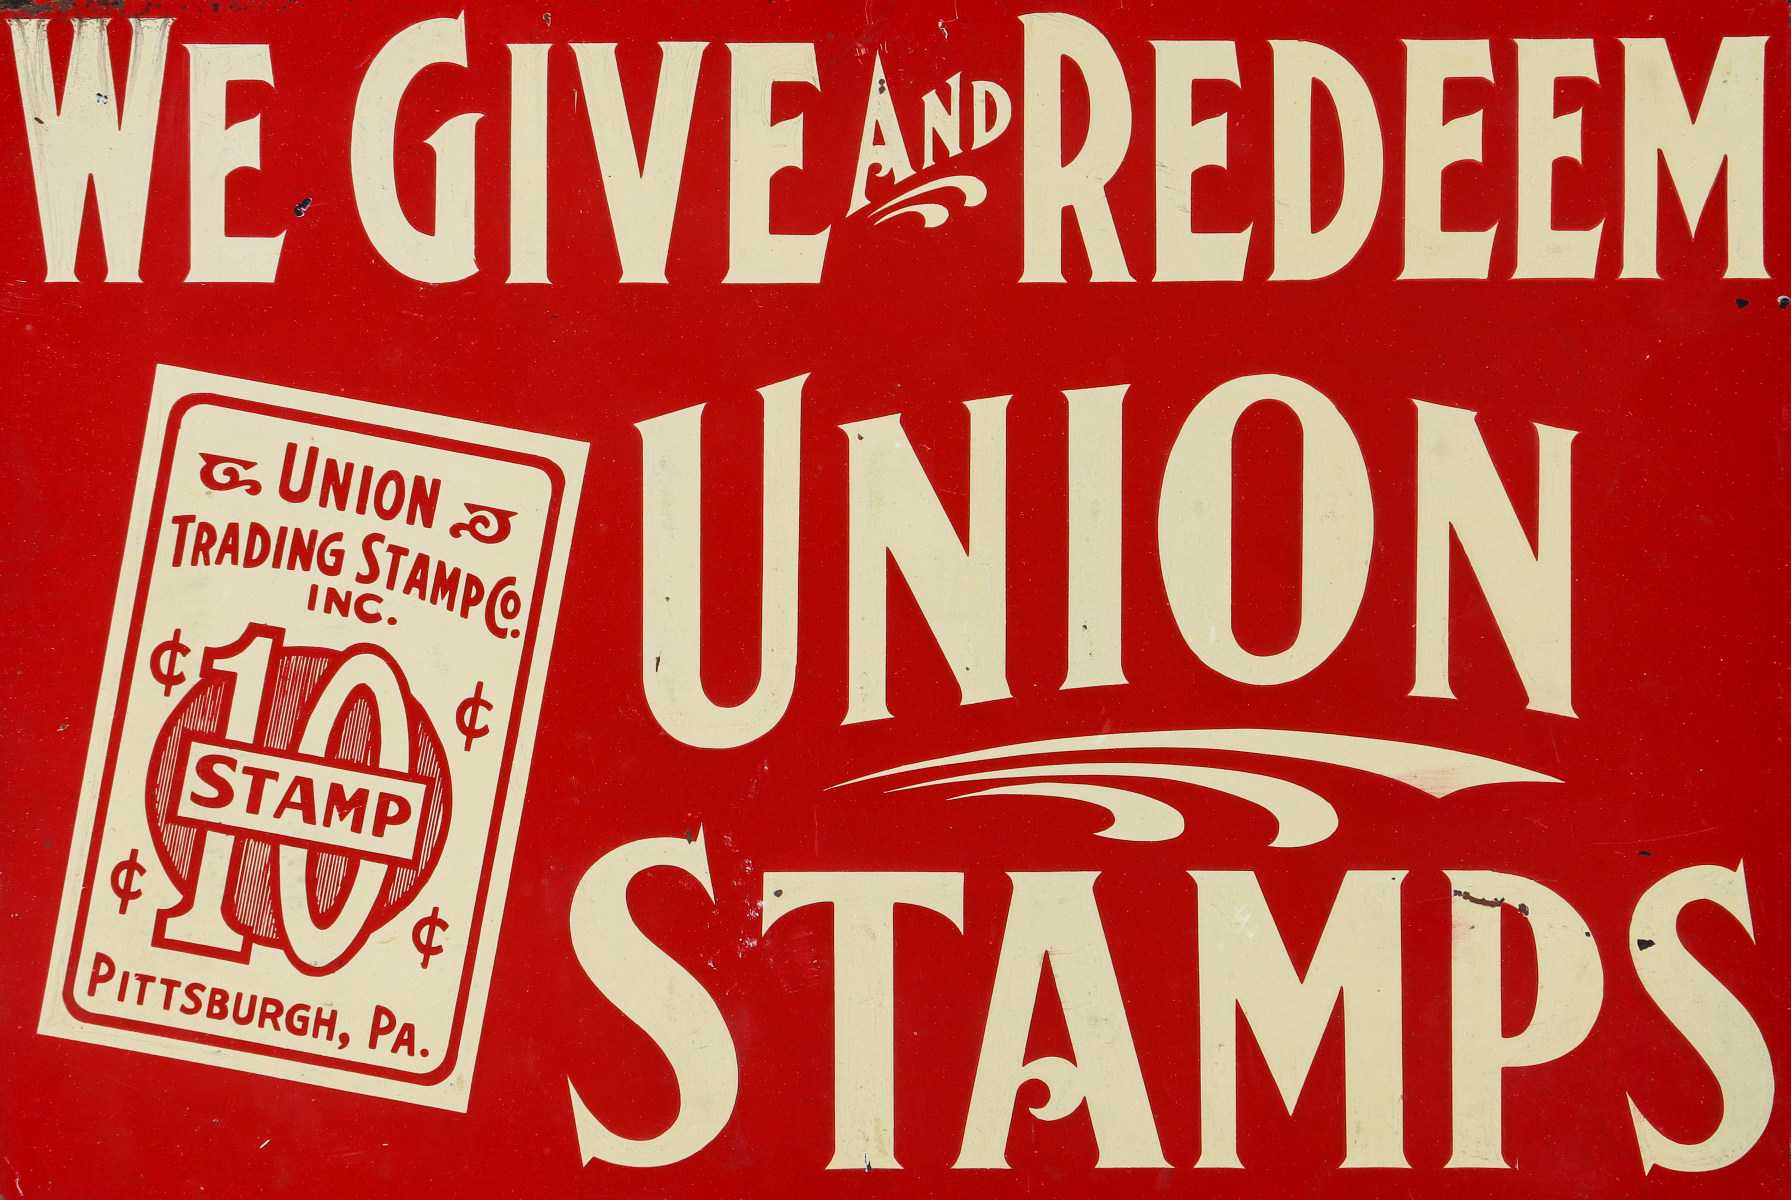 A UNION TRADING STAMPS 10 CENTS DOUBLE-SIDED TIN SIGN